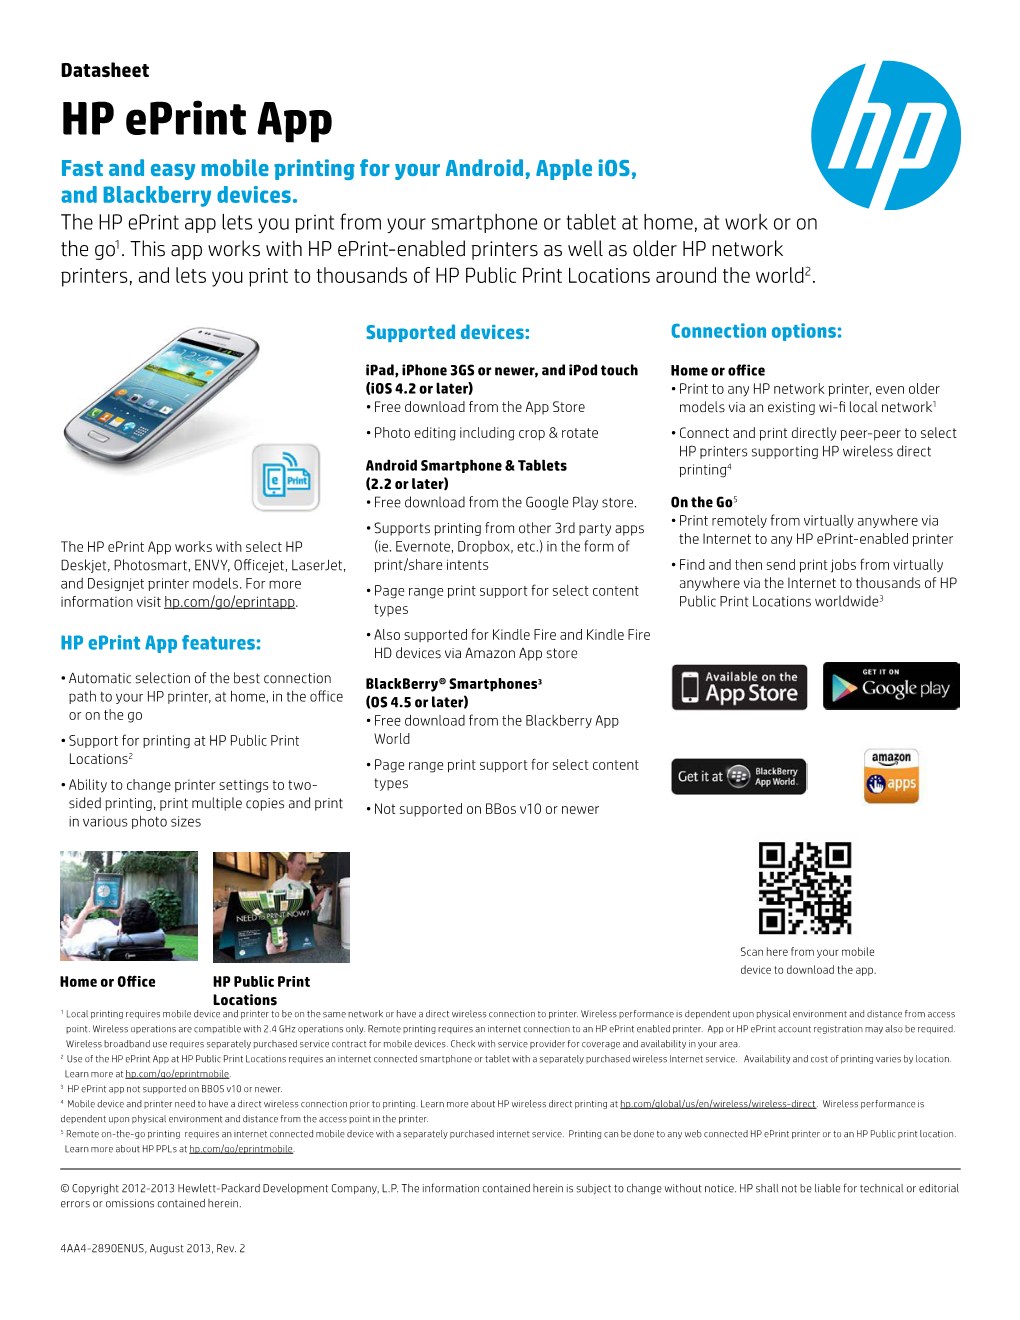 HP Eprint App Fast and Easy Mobile Printing for Your Android, Apple Ios, and Blackberry Devices